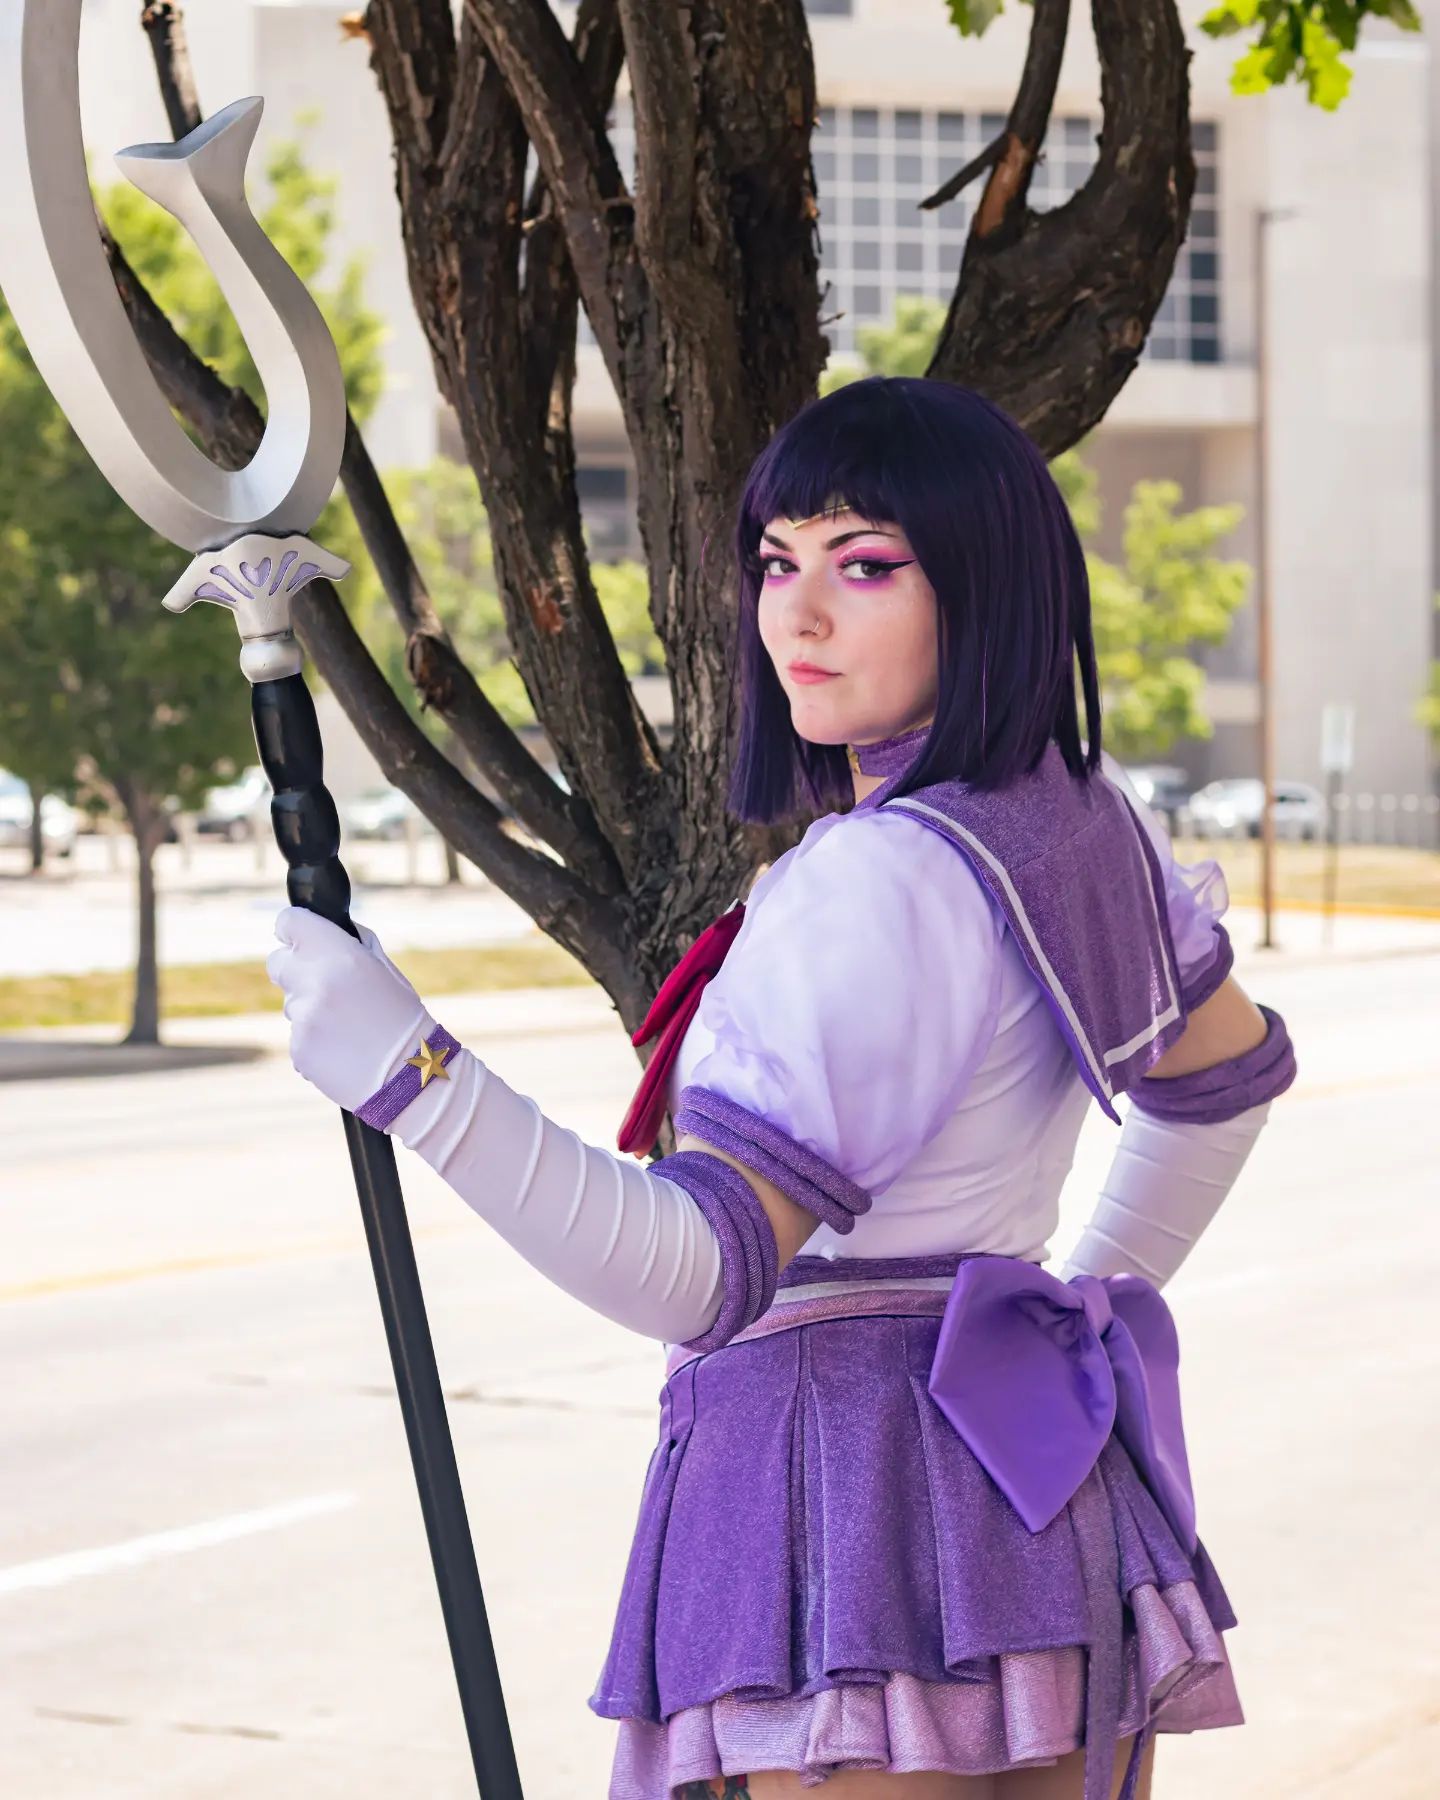 Gotta show off the ✨butt bow✨
I'm really excited to start working on my Fairy Sailor Saturn cosplay, I ordered the fabric samples and have so many ideas in my head on how to make everything! 
Beautiful photo by @mimoouniverse 💜